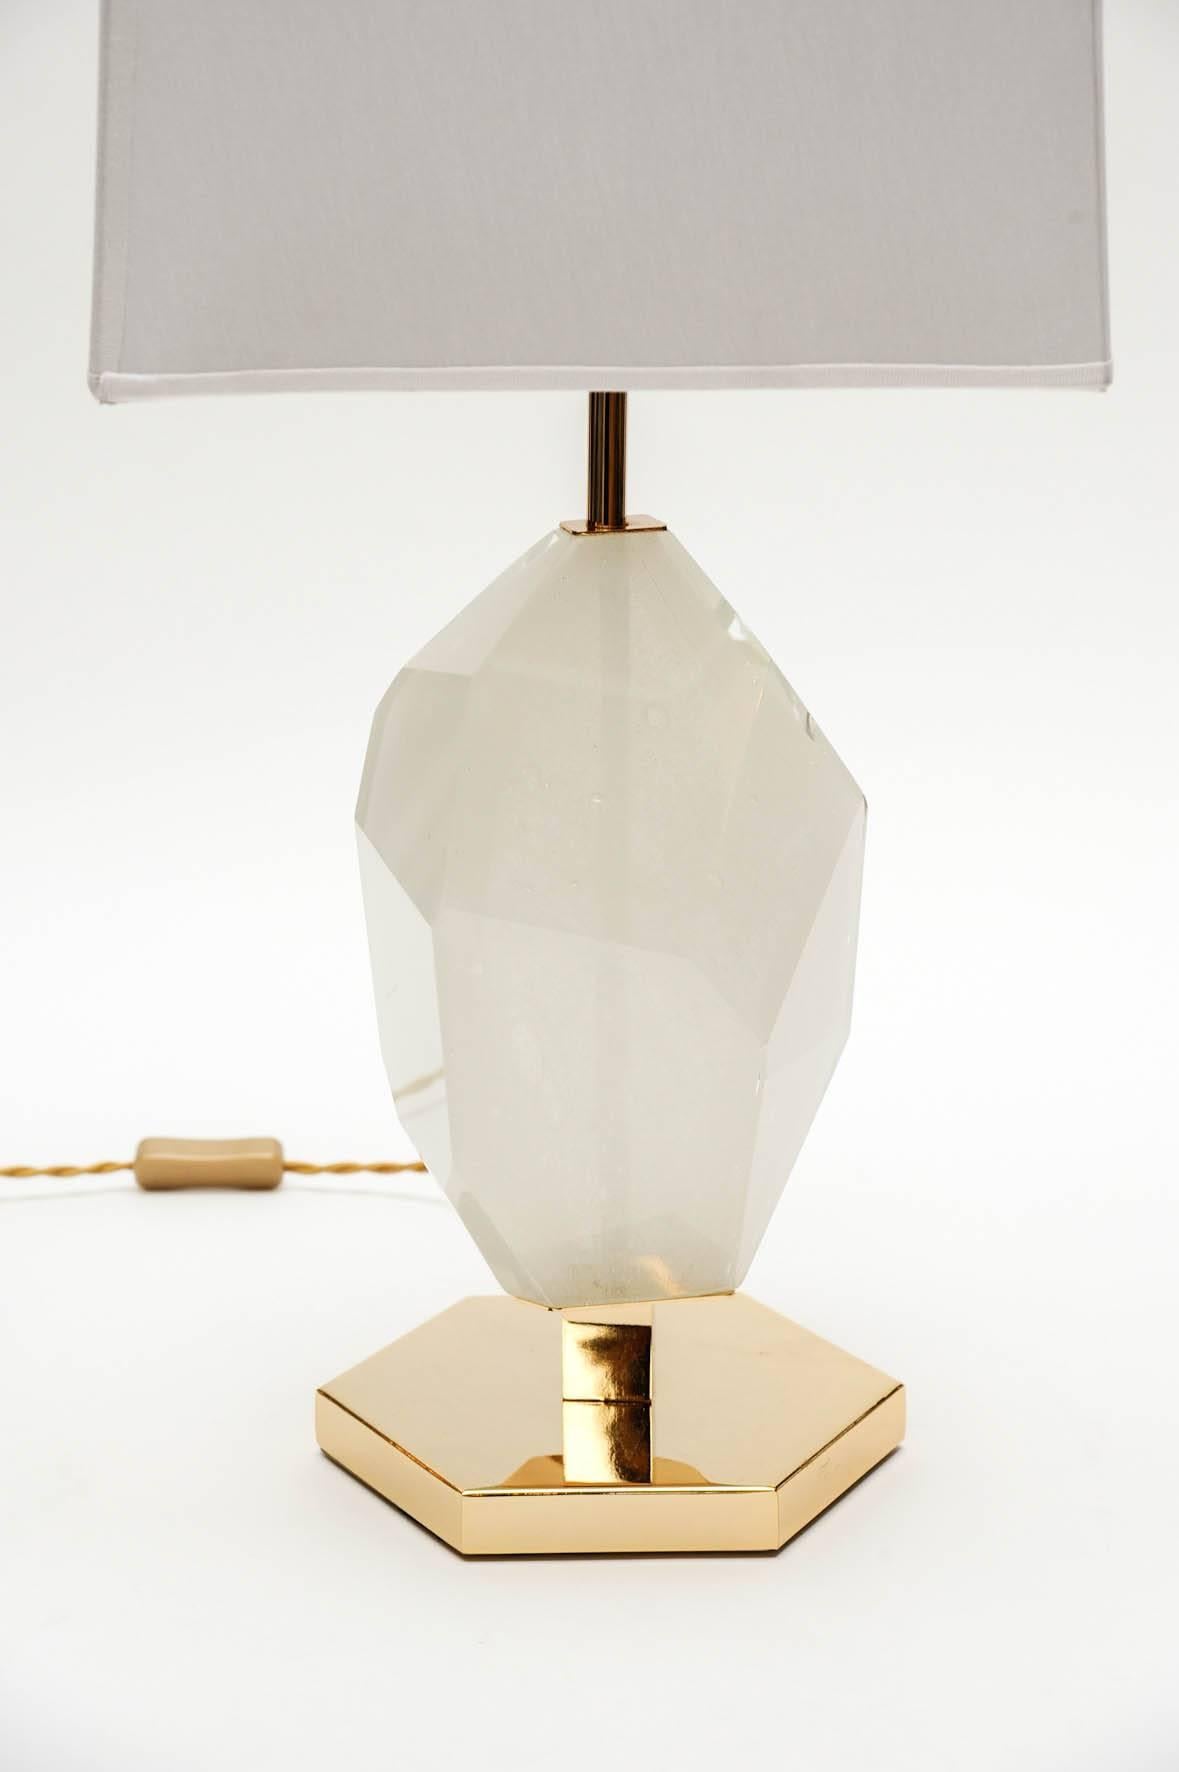 Decorative and elegant pair of table lamps made of a brass hexagonal foot and structure, and a centerpiece of slightly transparent and white resin.

The brass has been nickeled then slightly gold finished, which gives the lamp an unique color